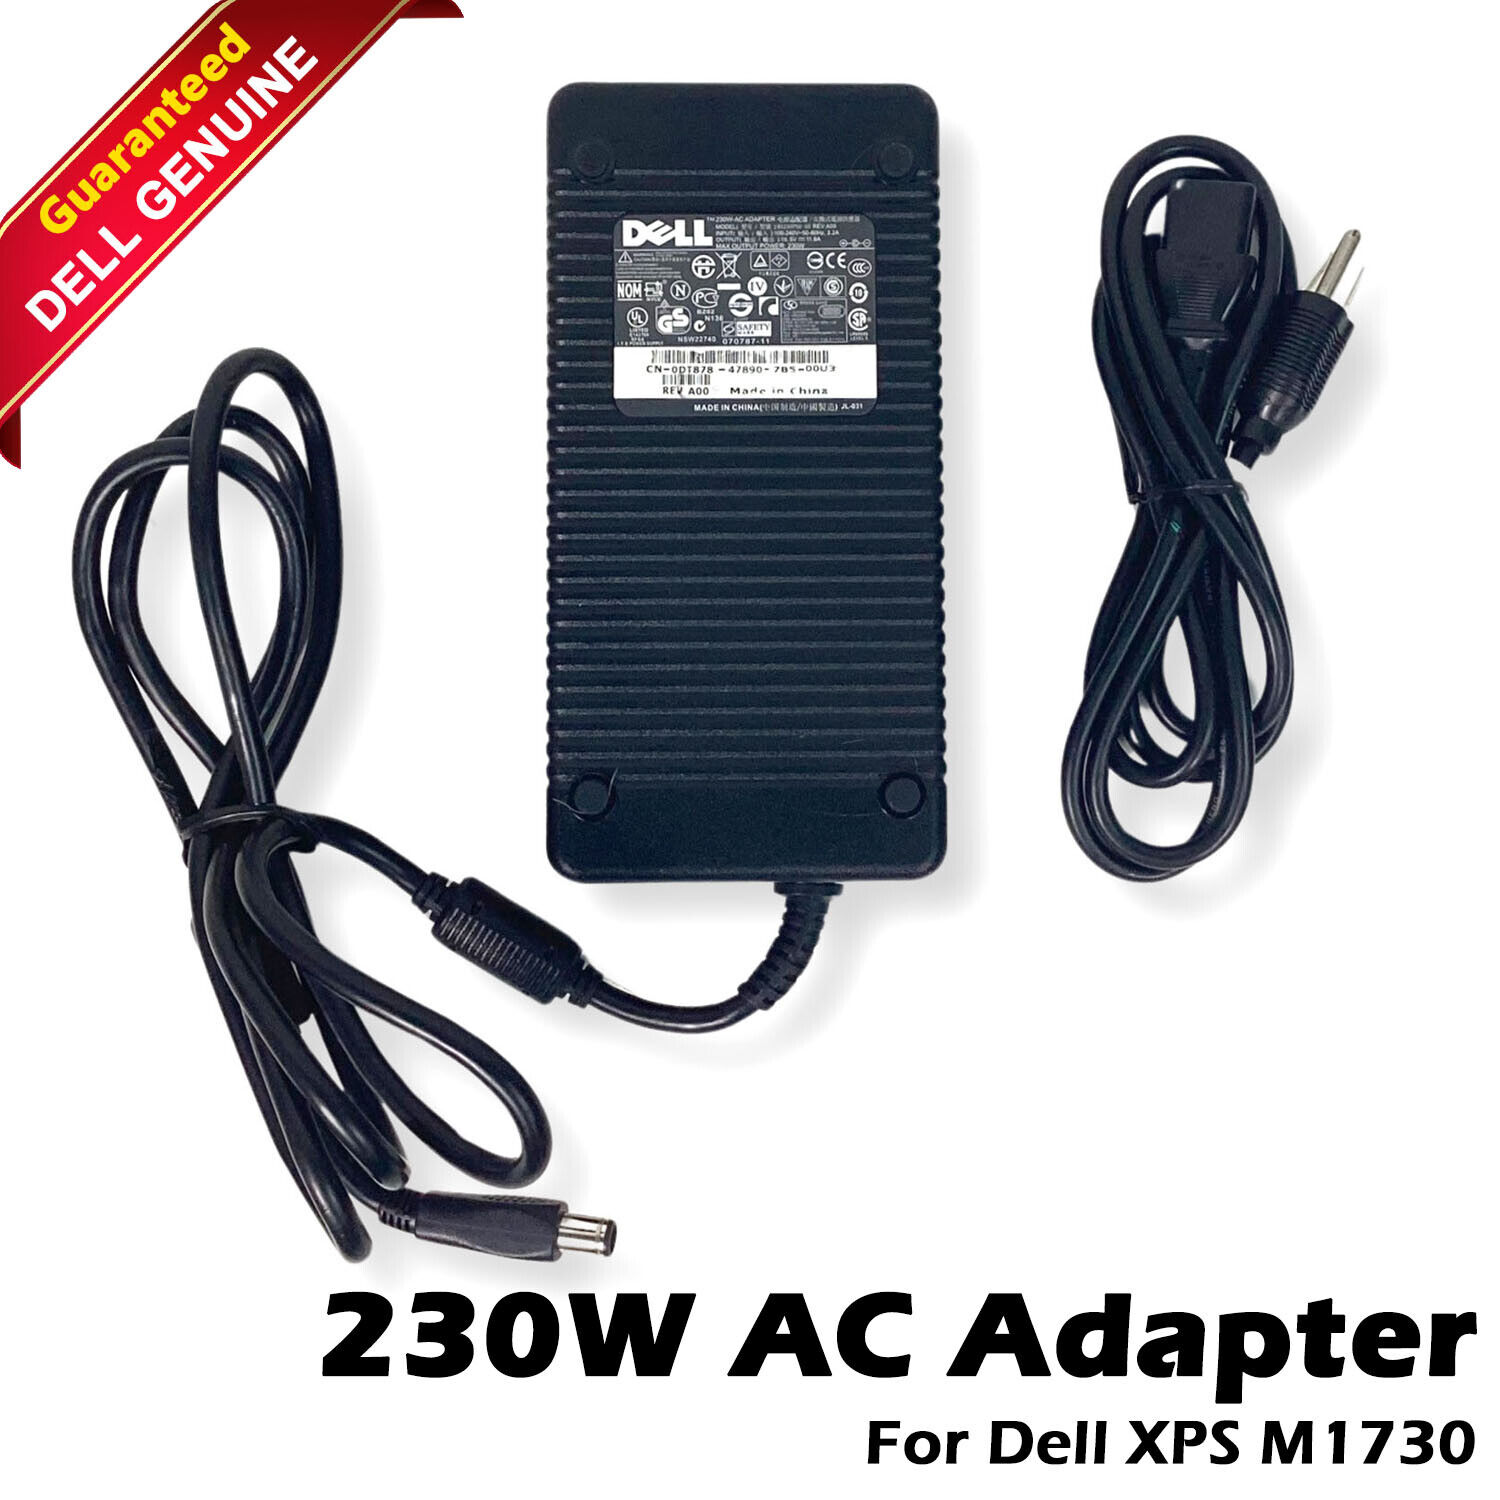 Genuine OEM DELL XPS M1730 AC Adapter PN402 230W DA230PS0-00 PA-19 DT878 CN072